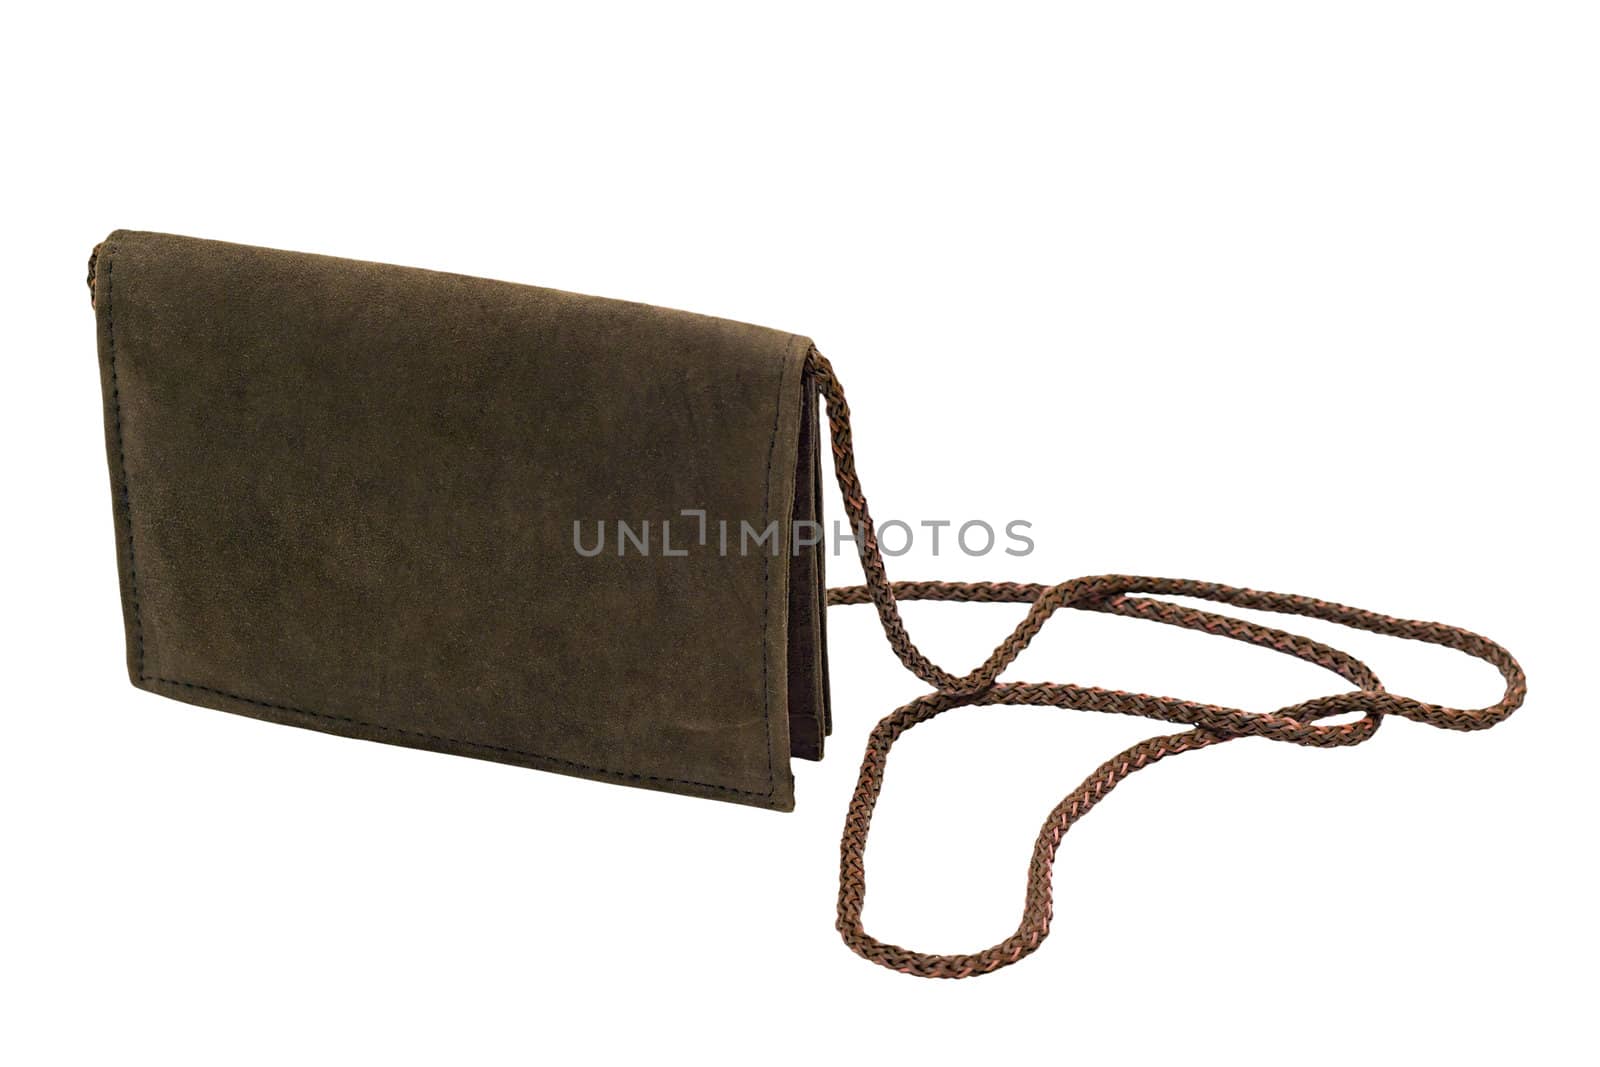 purse bag with rope handle isolated on white background